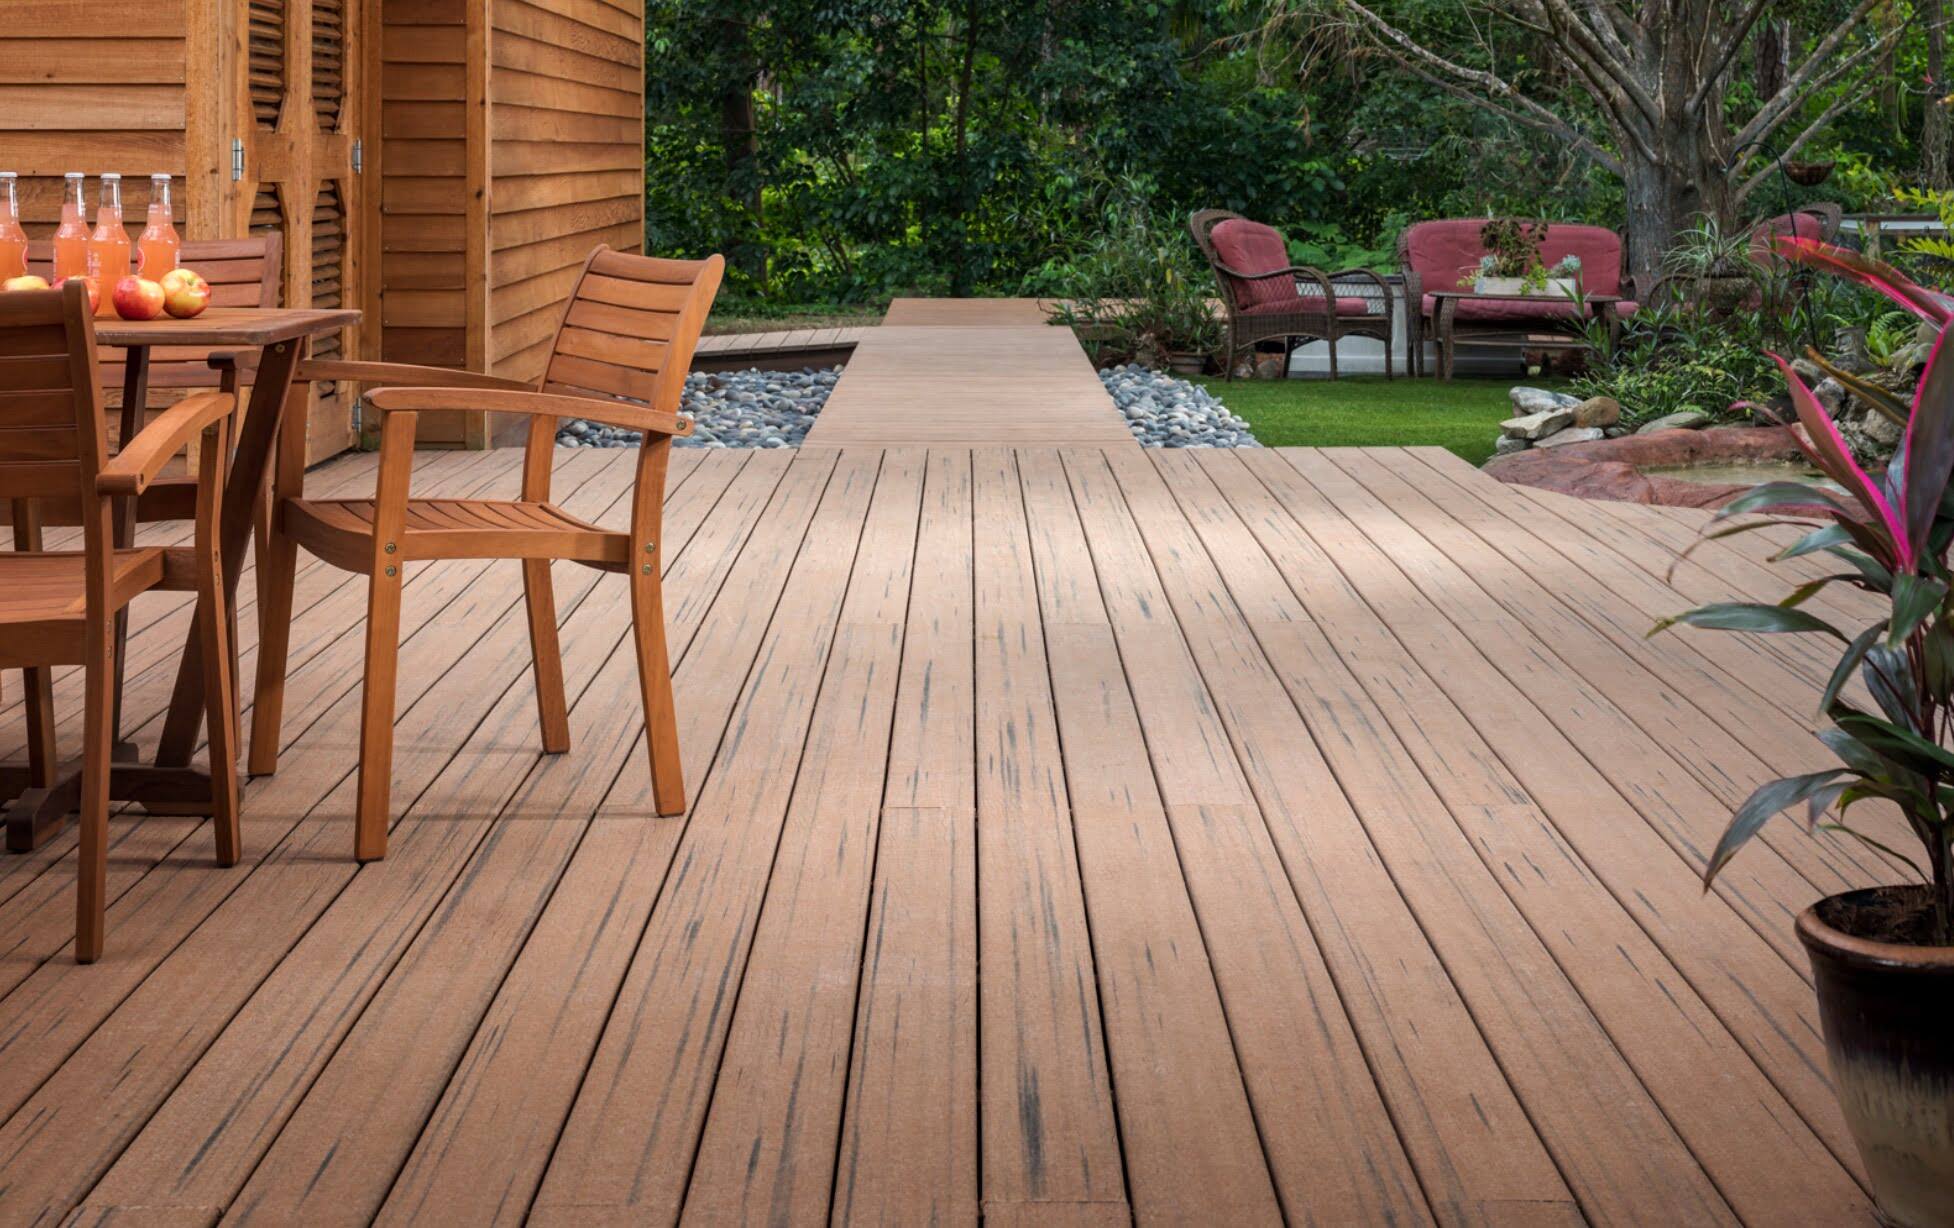 What Type Of Wood Is Used For Outdoor Decks